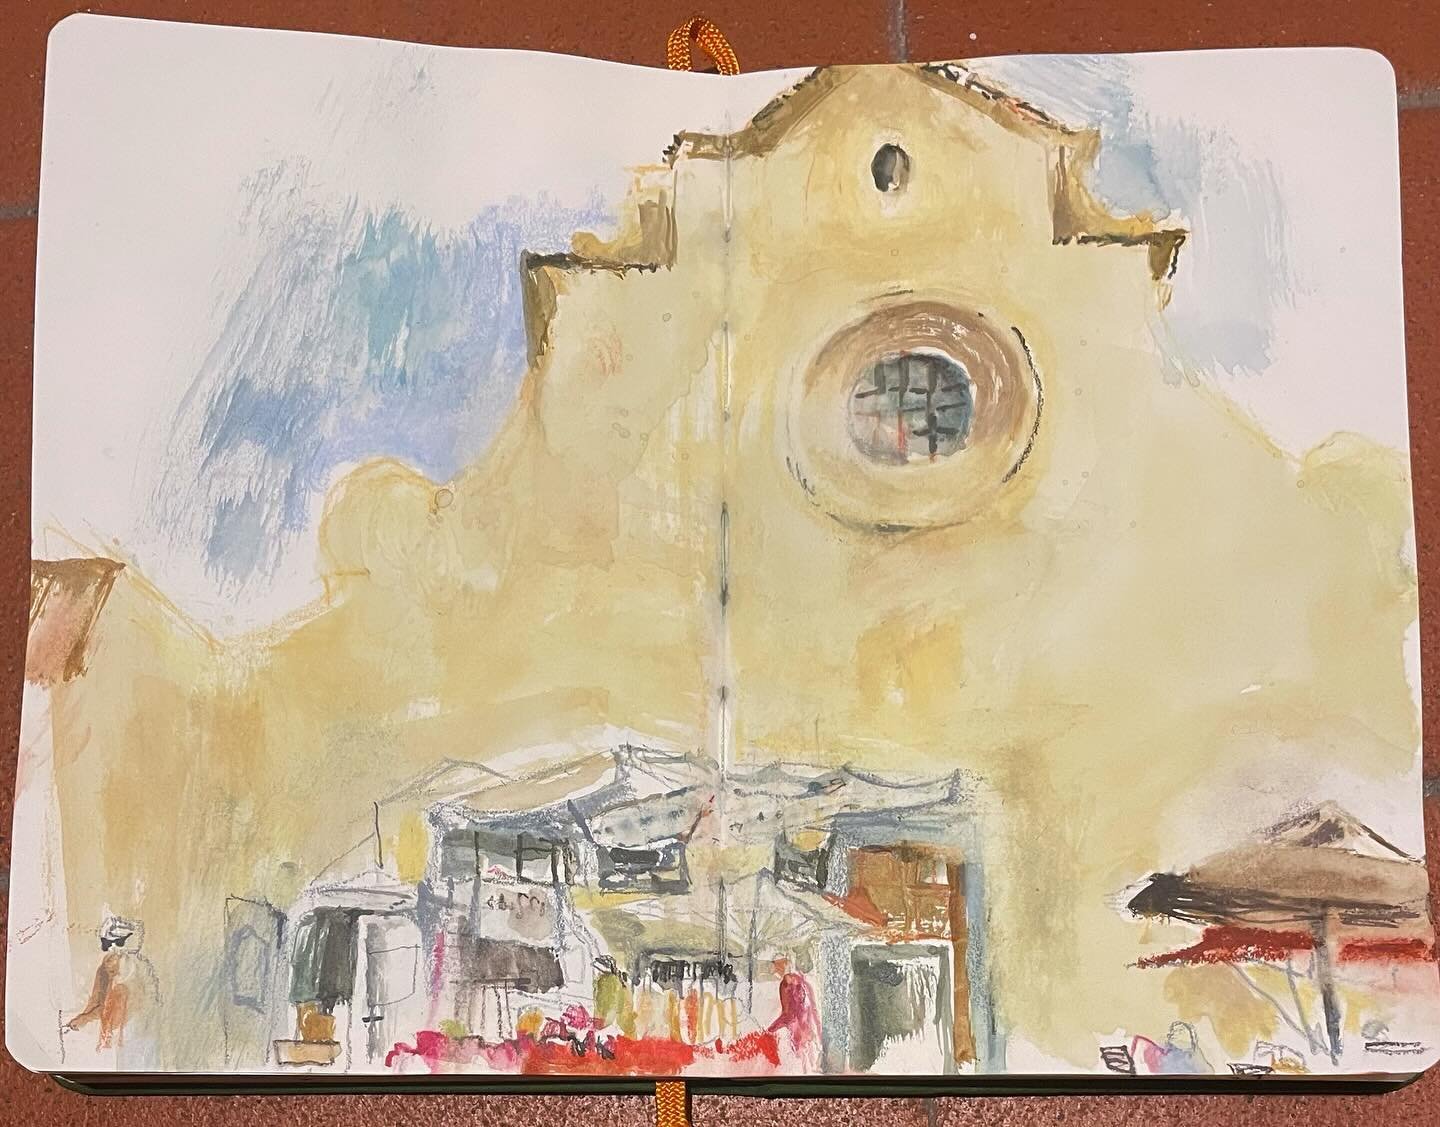 Today&rsquo;s post: Chiesa de Santo Spirito. More stunning vistas and other bits. Check out the cool artist shop with the hand made building in the window(last photo). Damn I want those but it&rsquo;s not gonna fit in the suitcase for sure🤨😅
#flore